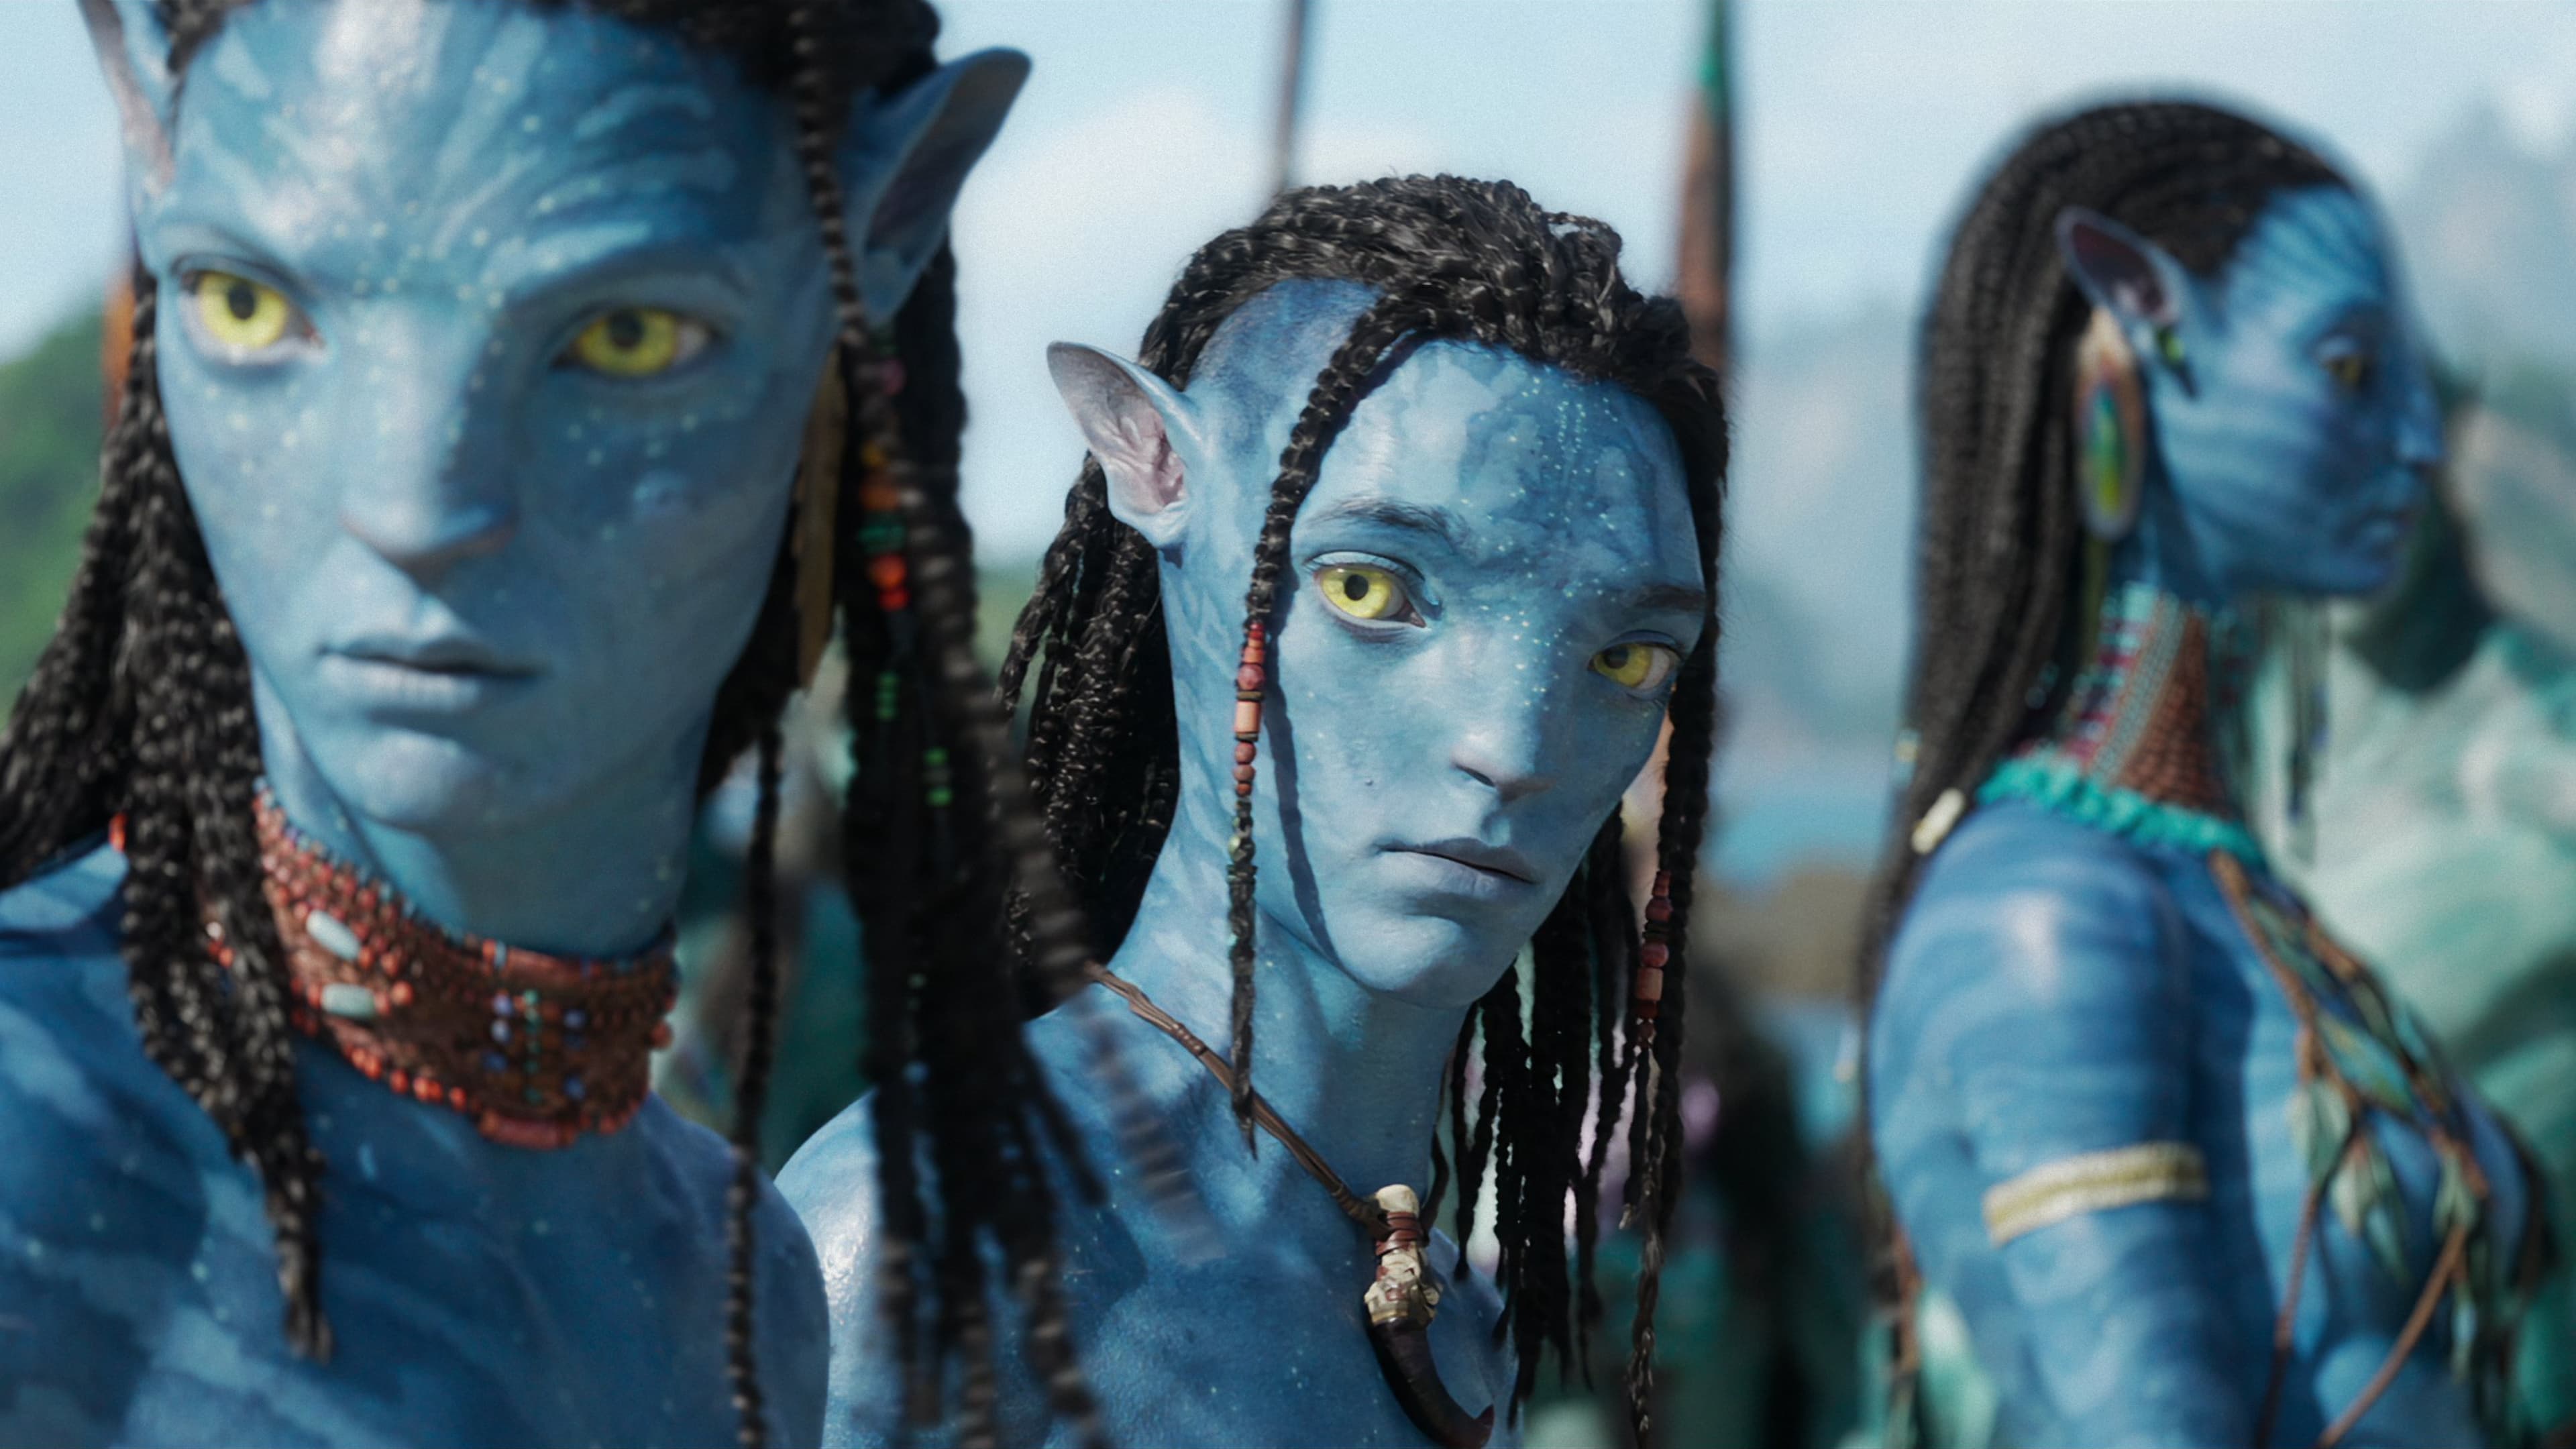 AVATAR 2: THE WAY OF WATER (2022)